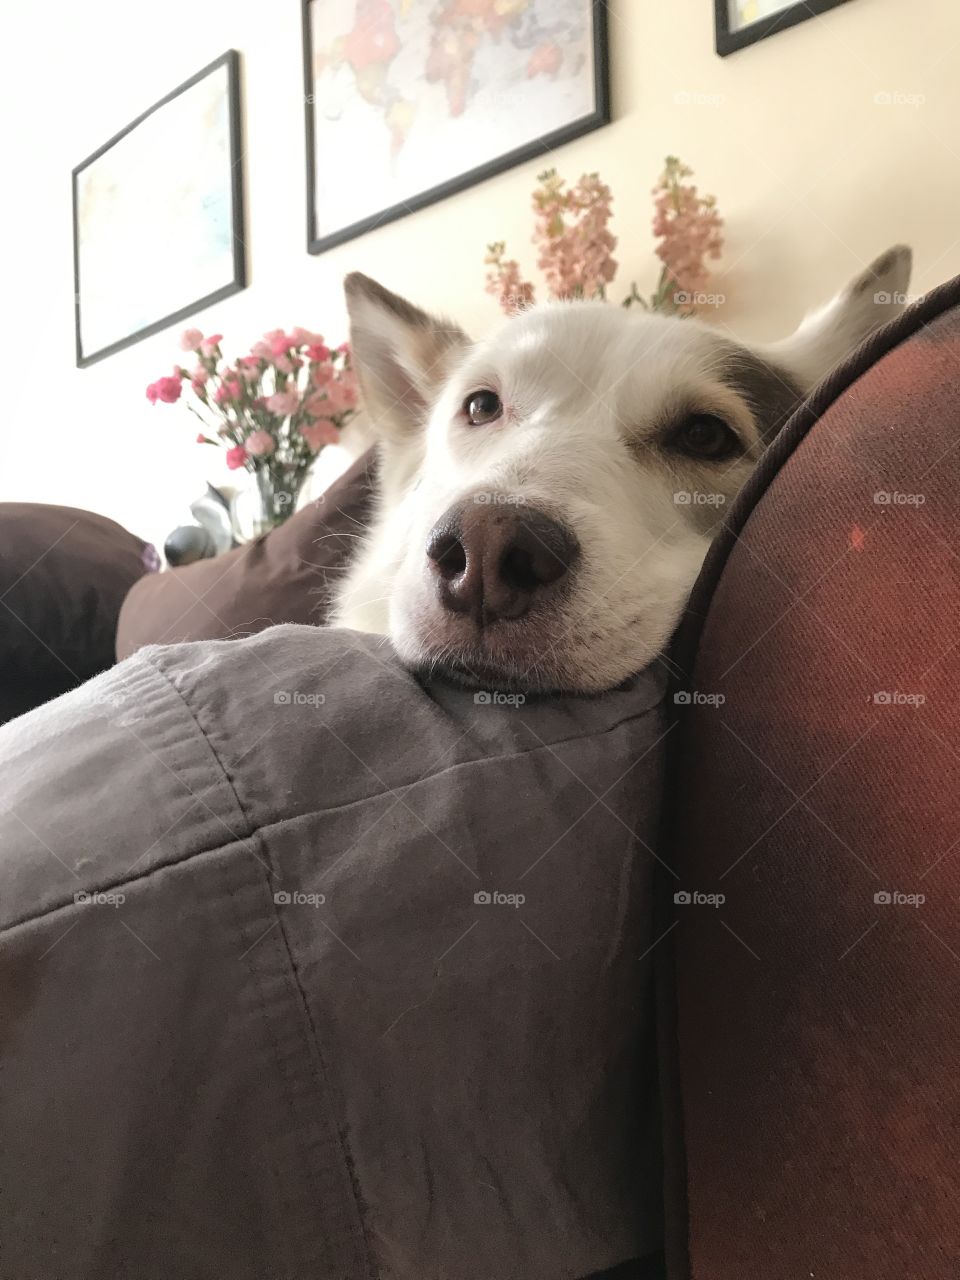 Dog using a pillow like a human with flowers in the background 